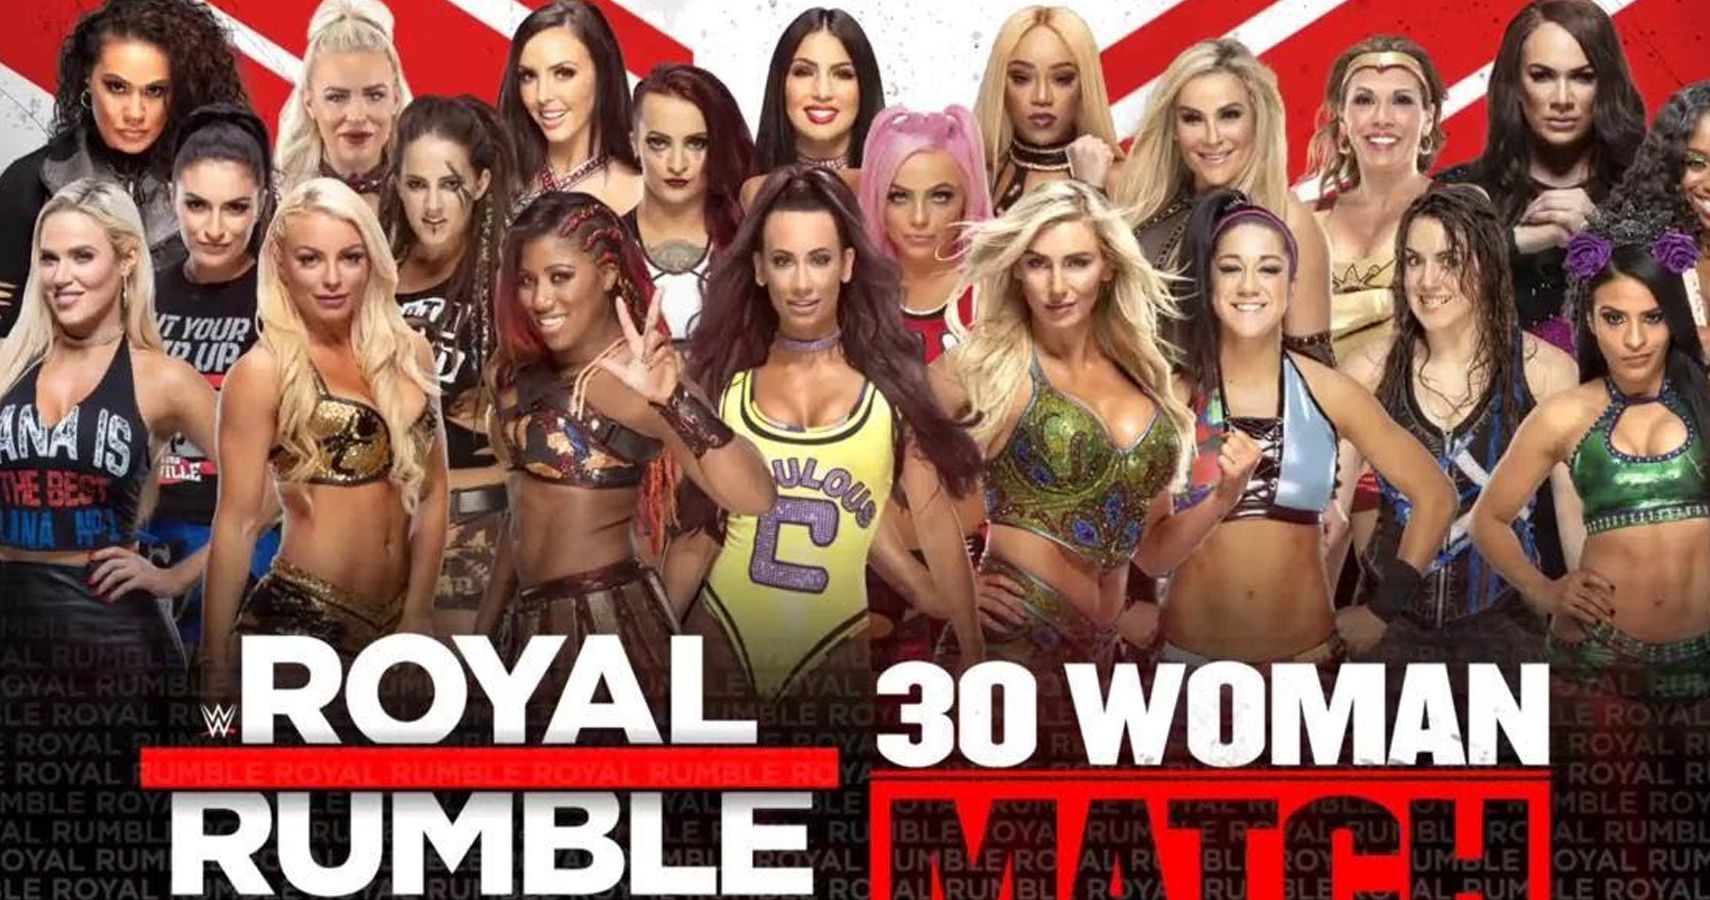 Potential Spoiler On A Female Entry Into The Women's Royal Rumble Match